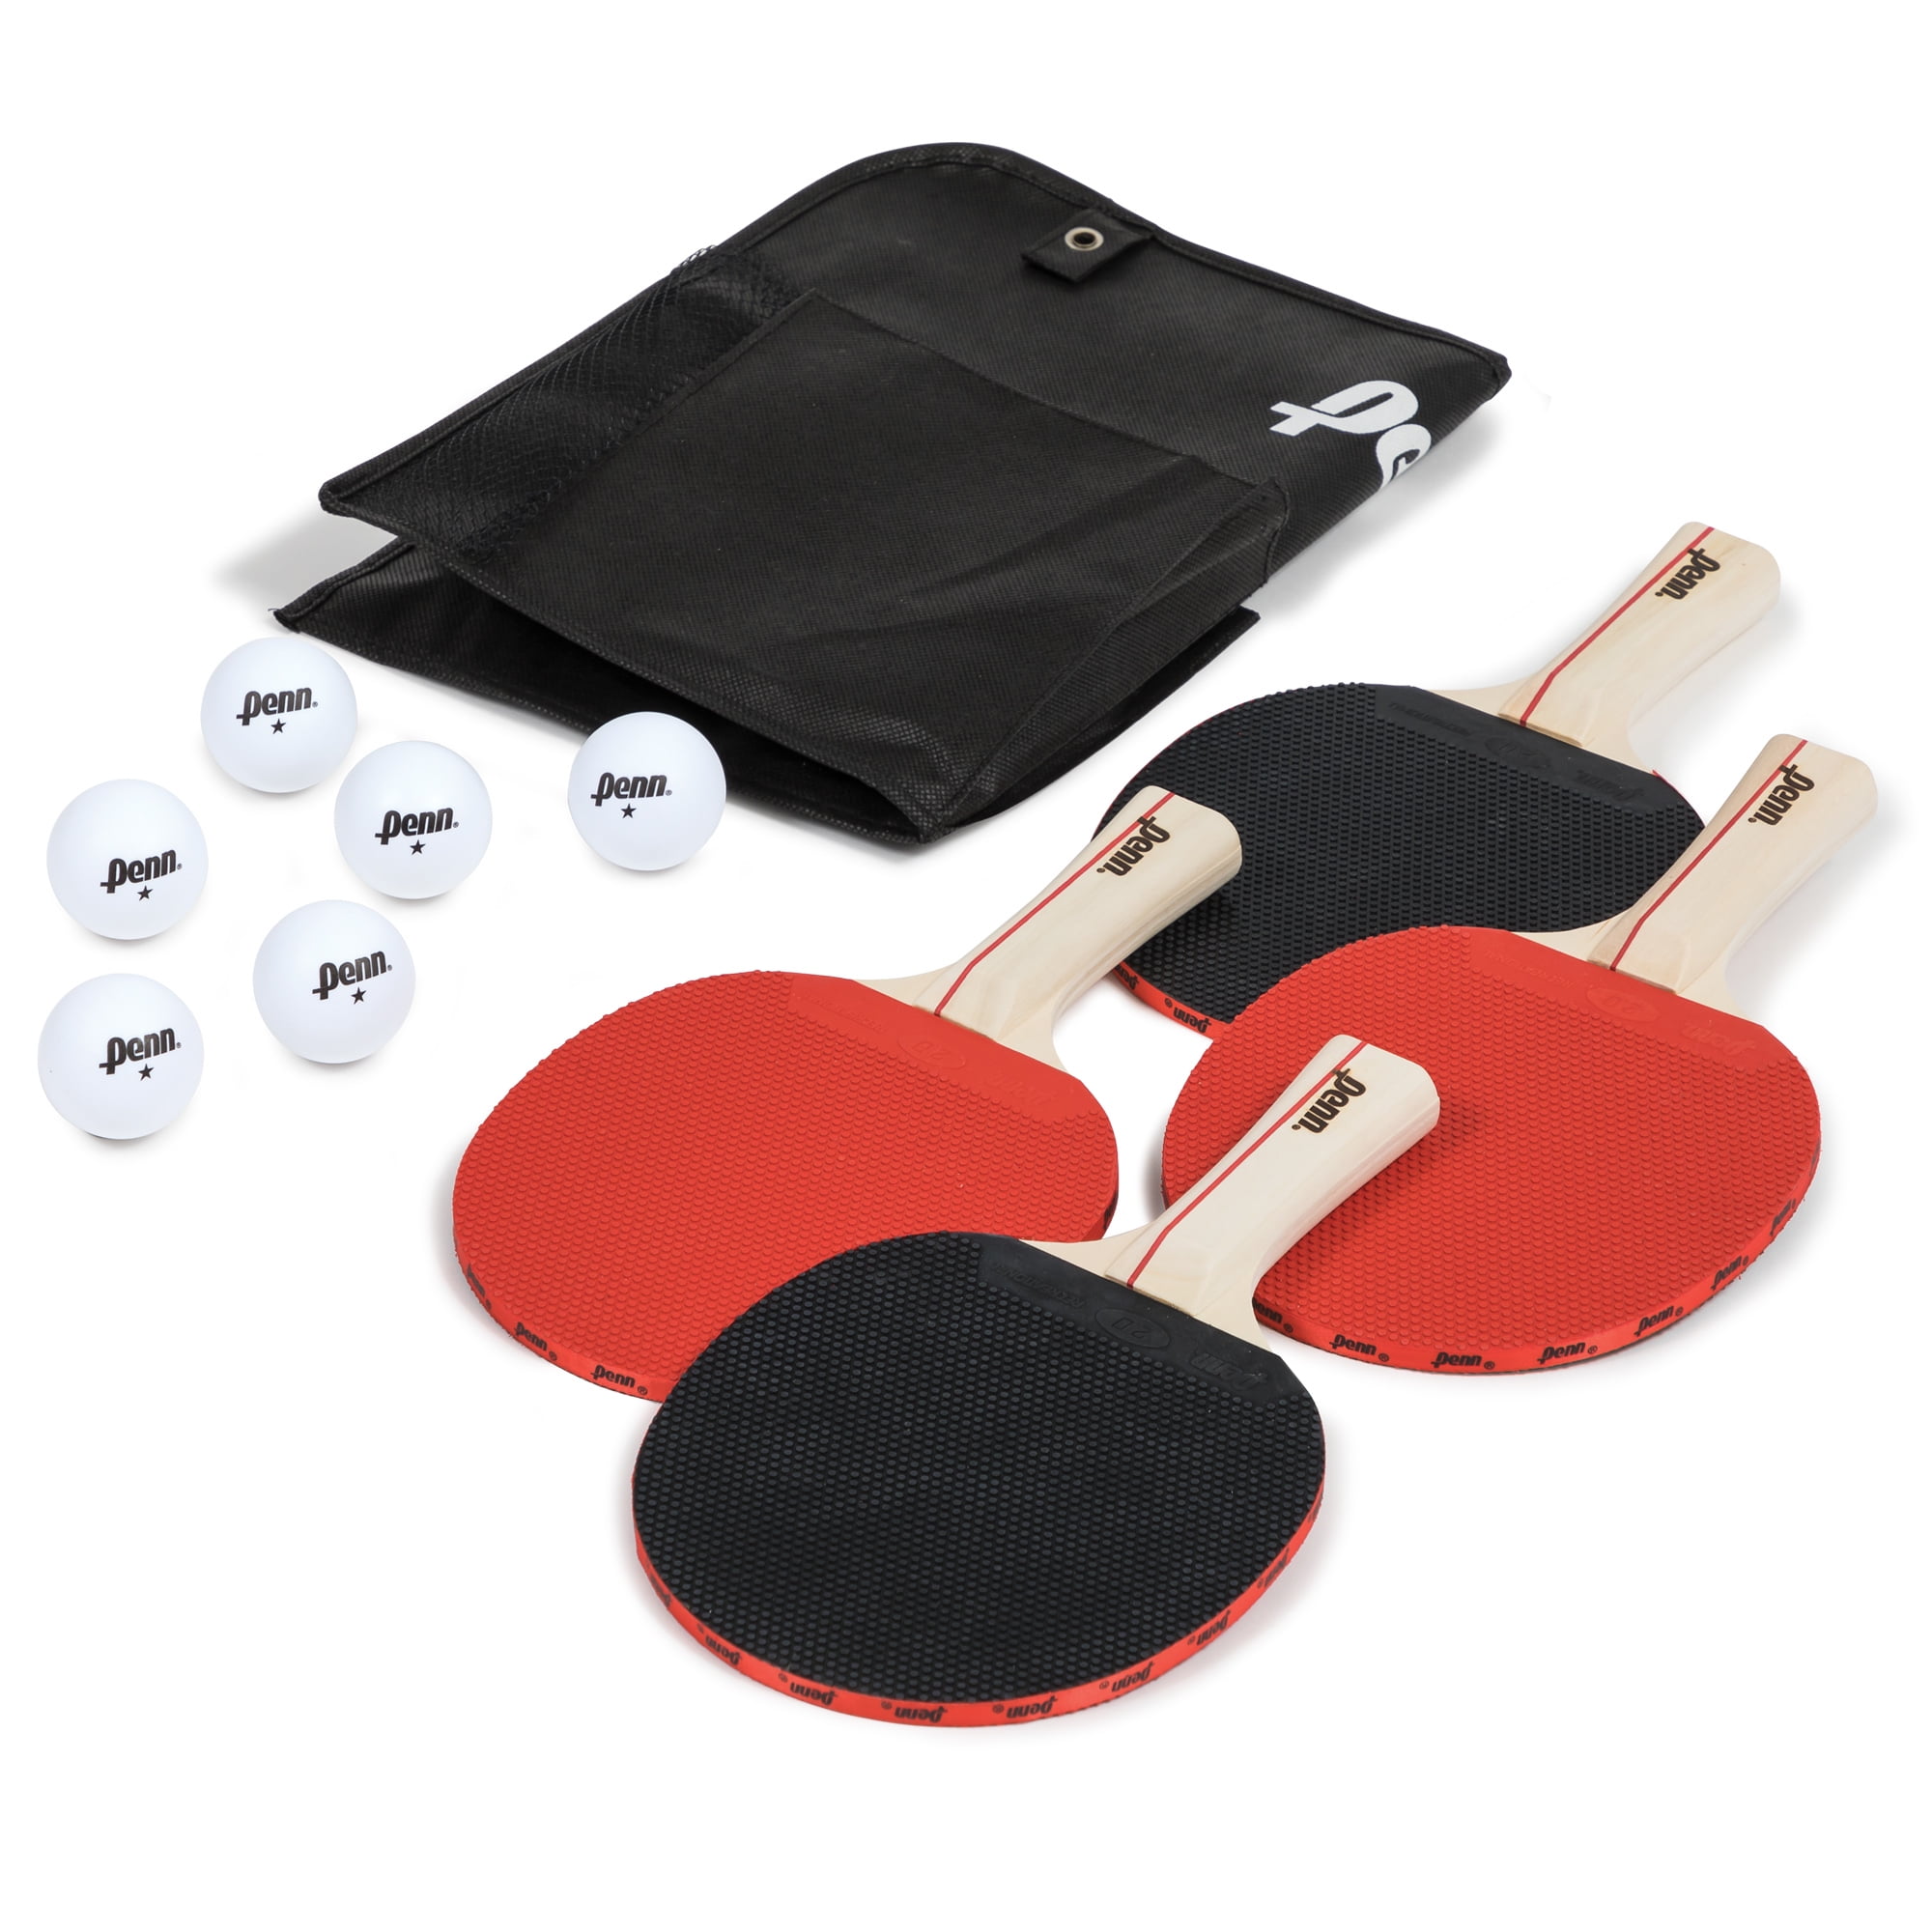 Penn 4.0 Tournament Table Tennis Paddle Red/black for sale online 